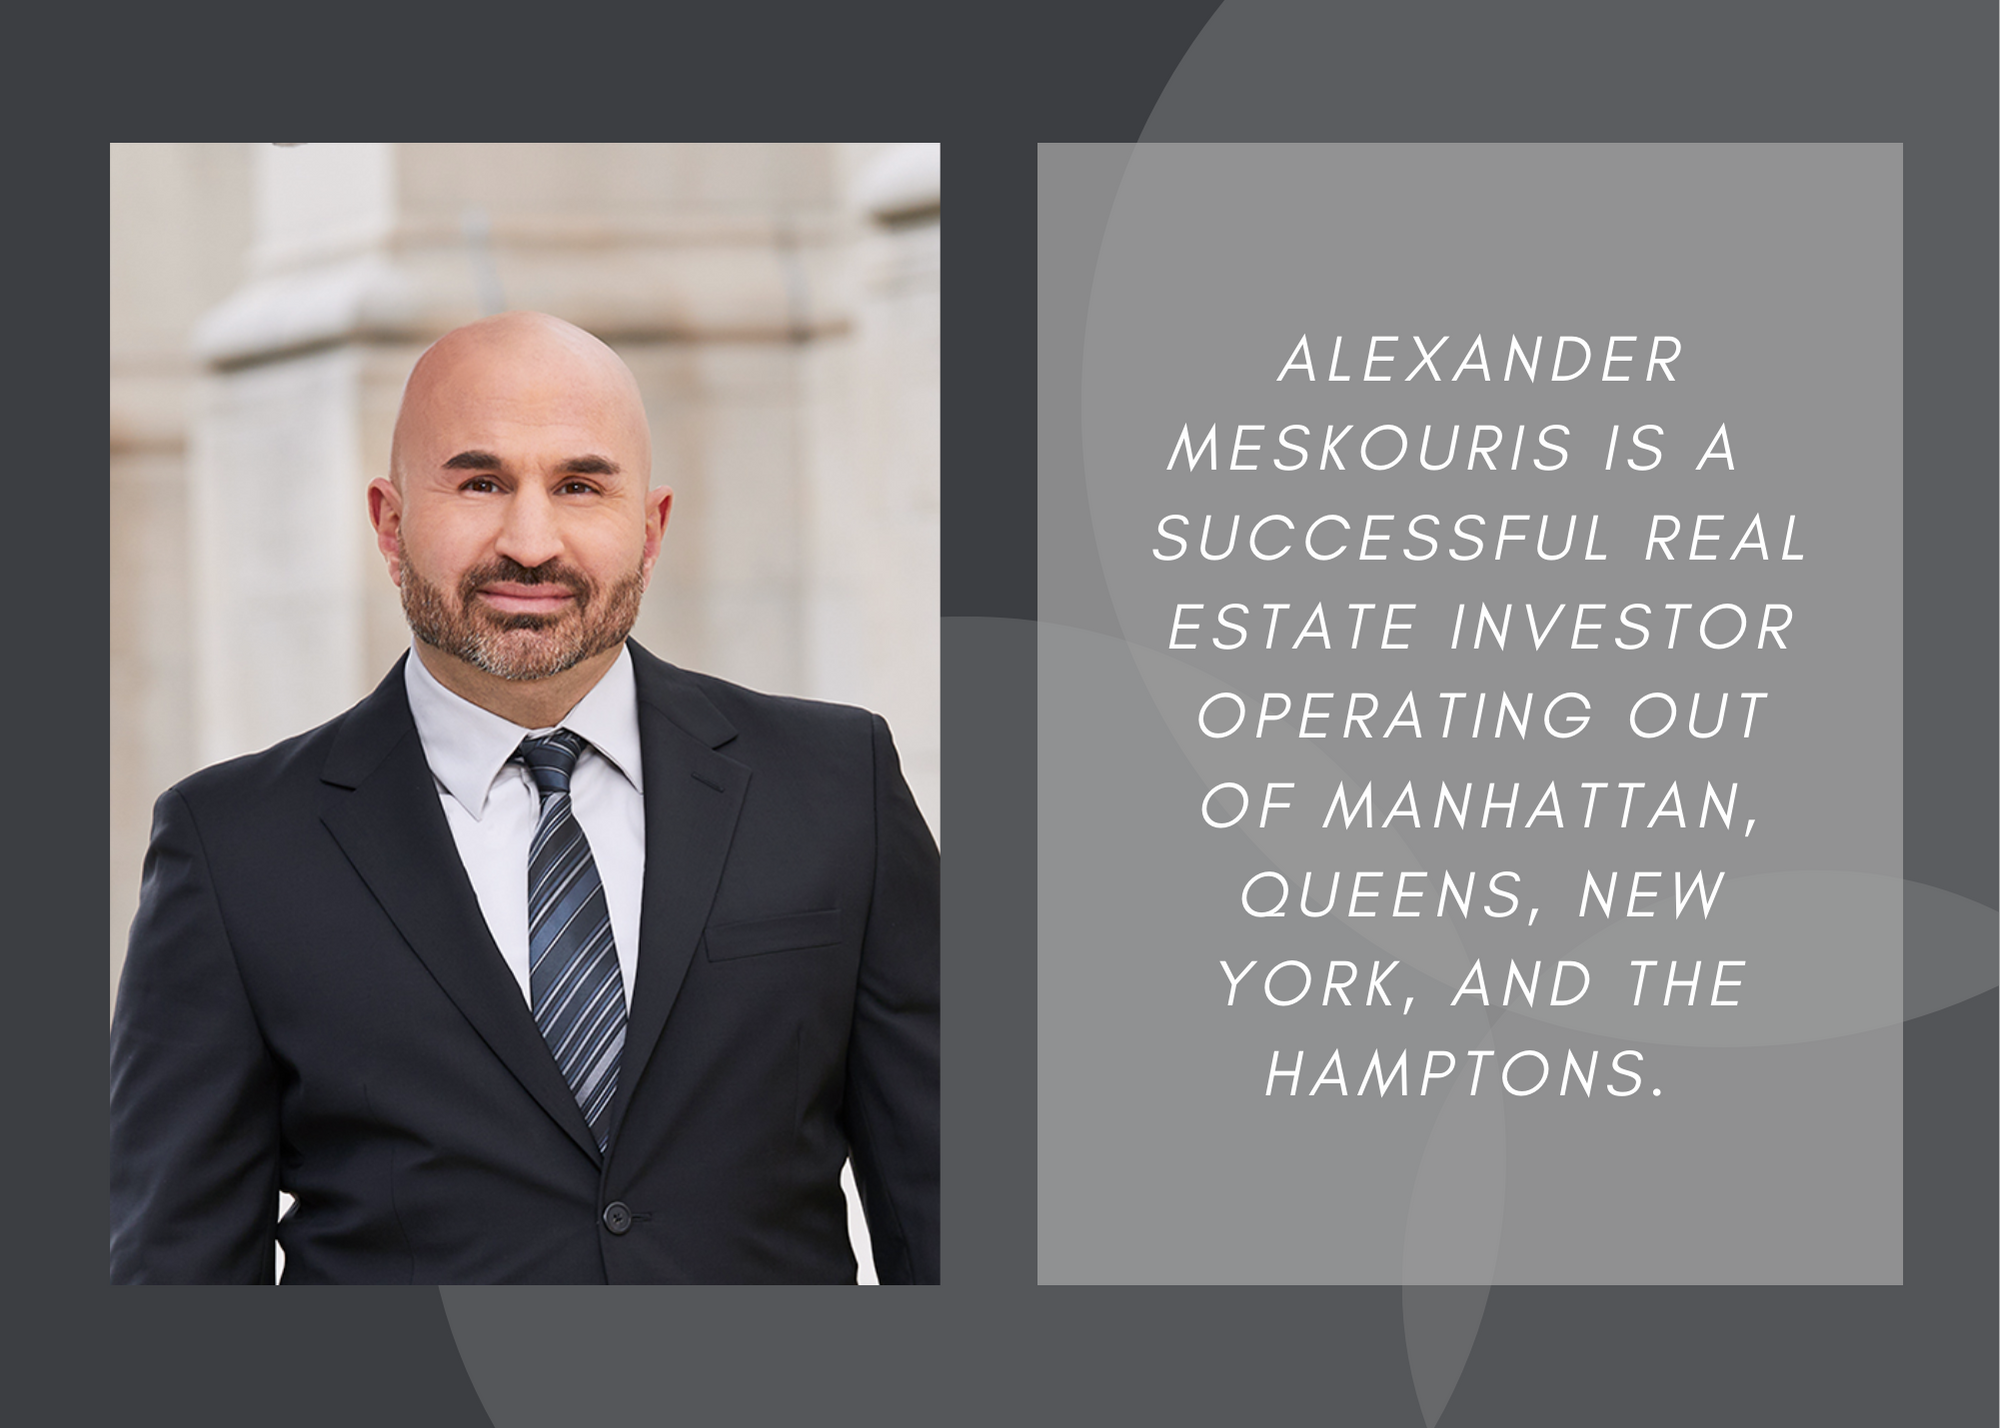 Alexander Meskouris, Thursday, May 26, 2022, Press release picture